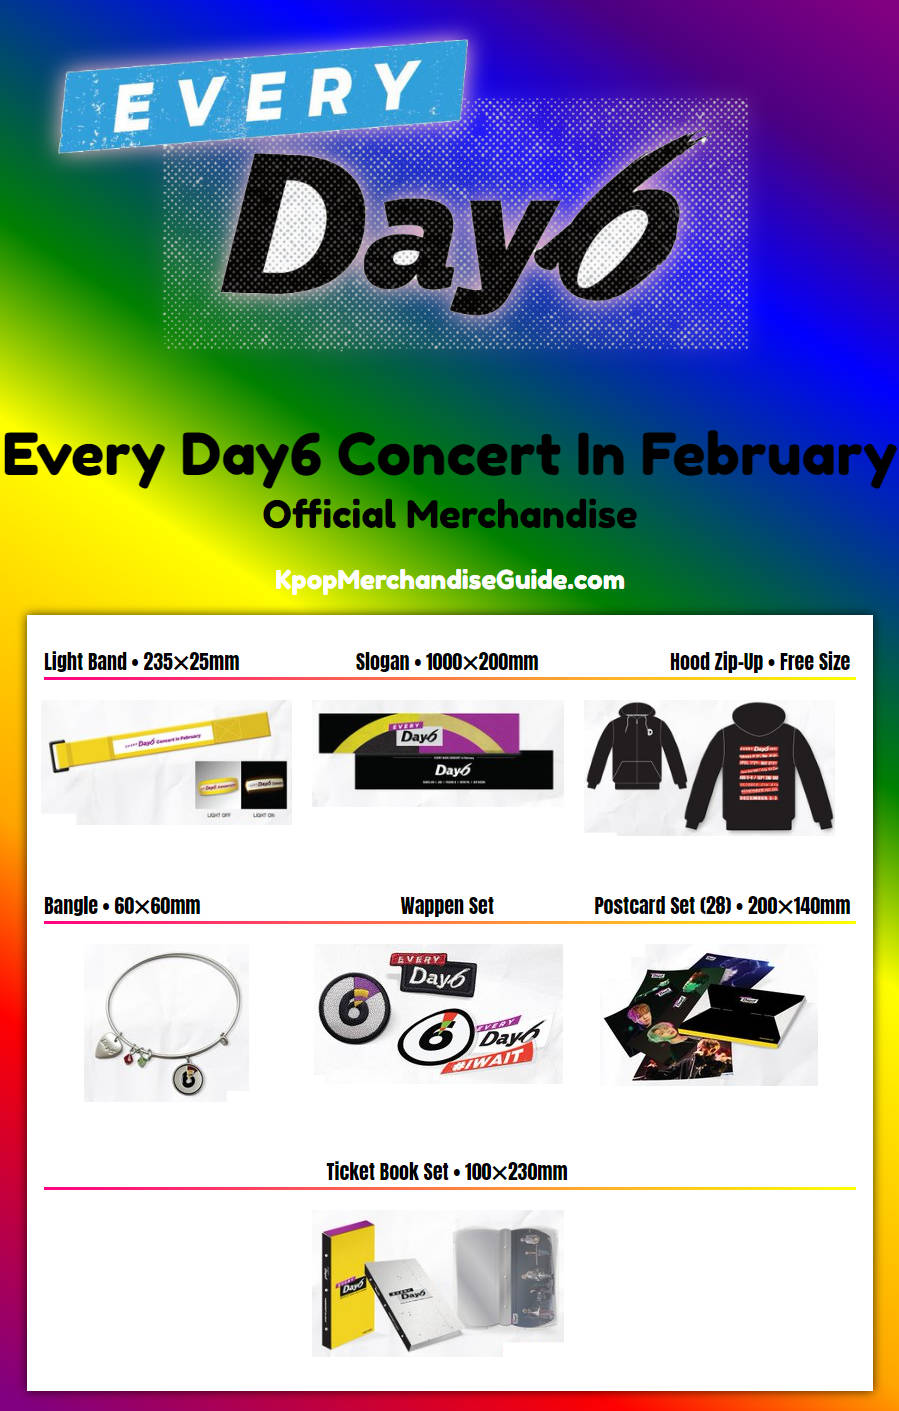 Every Day6 Concert In February Merchandise